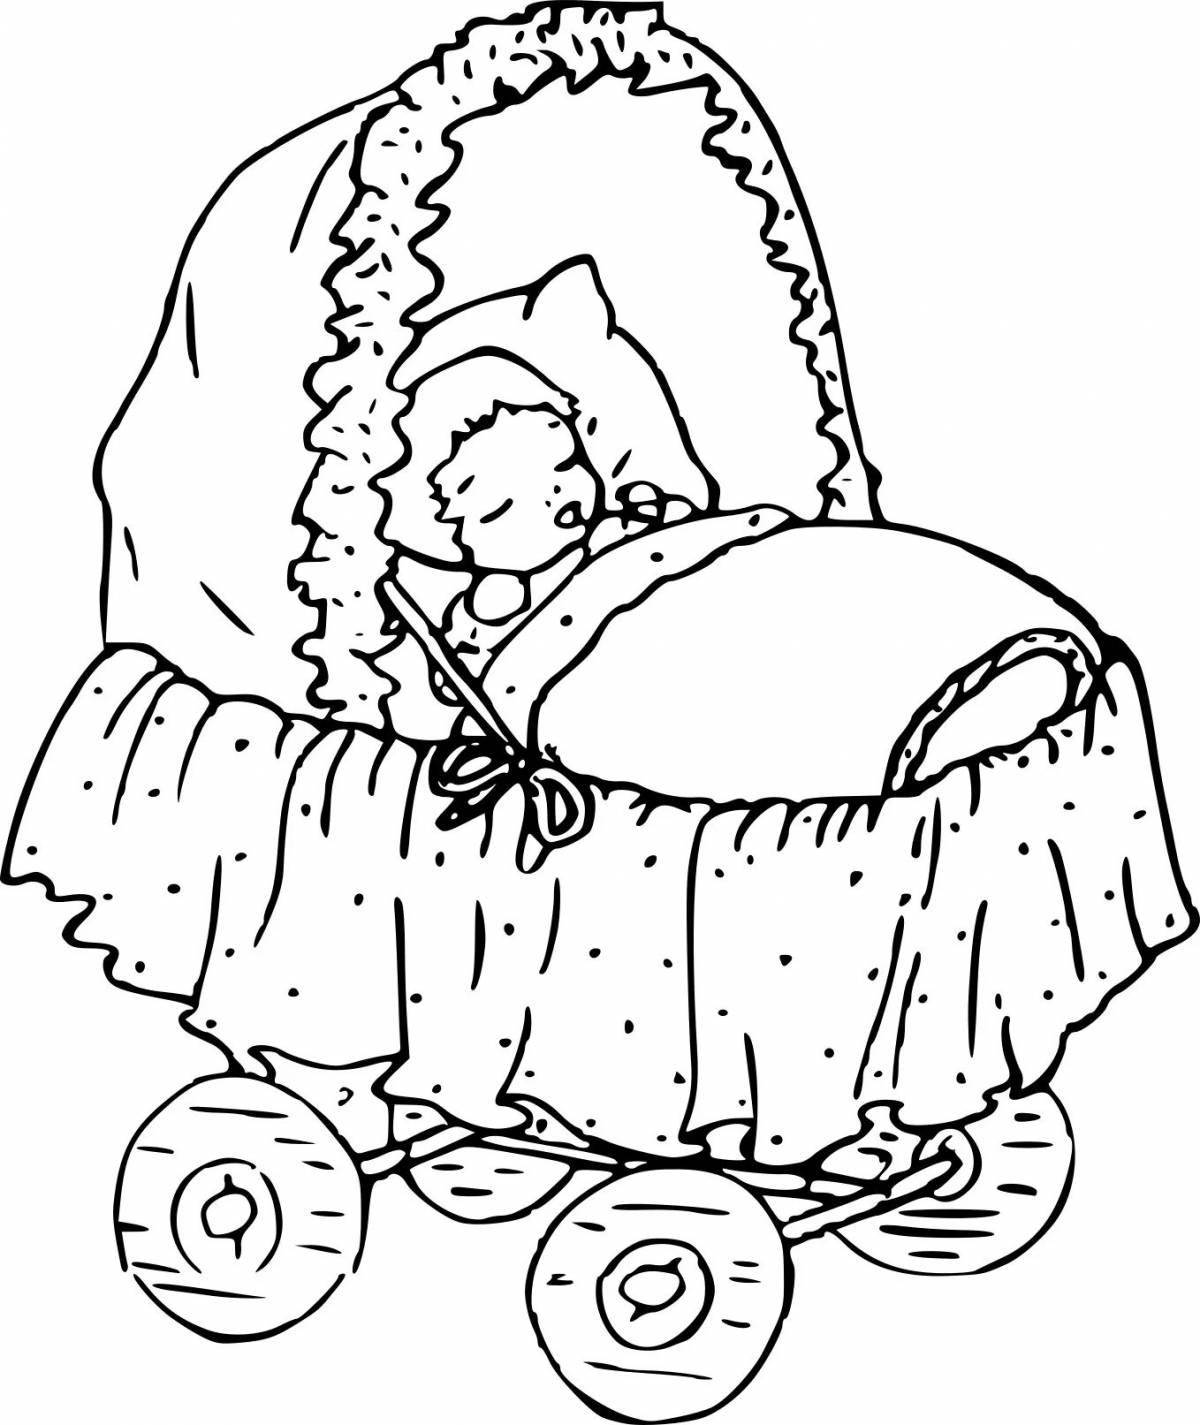 Coloring page crazy doll with bed